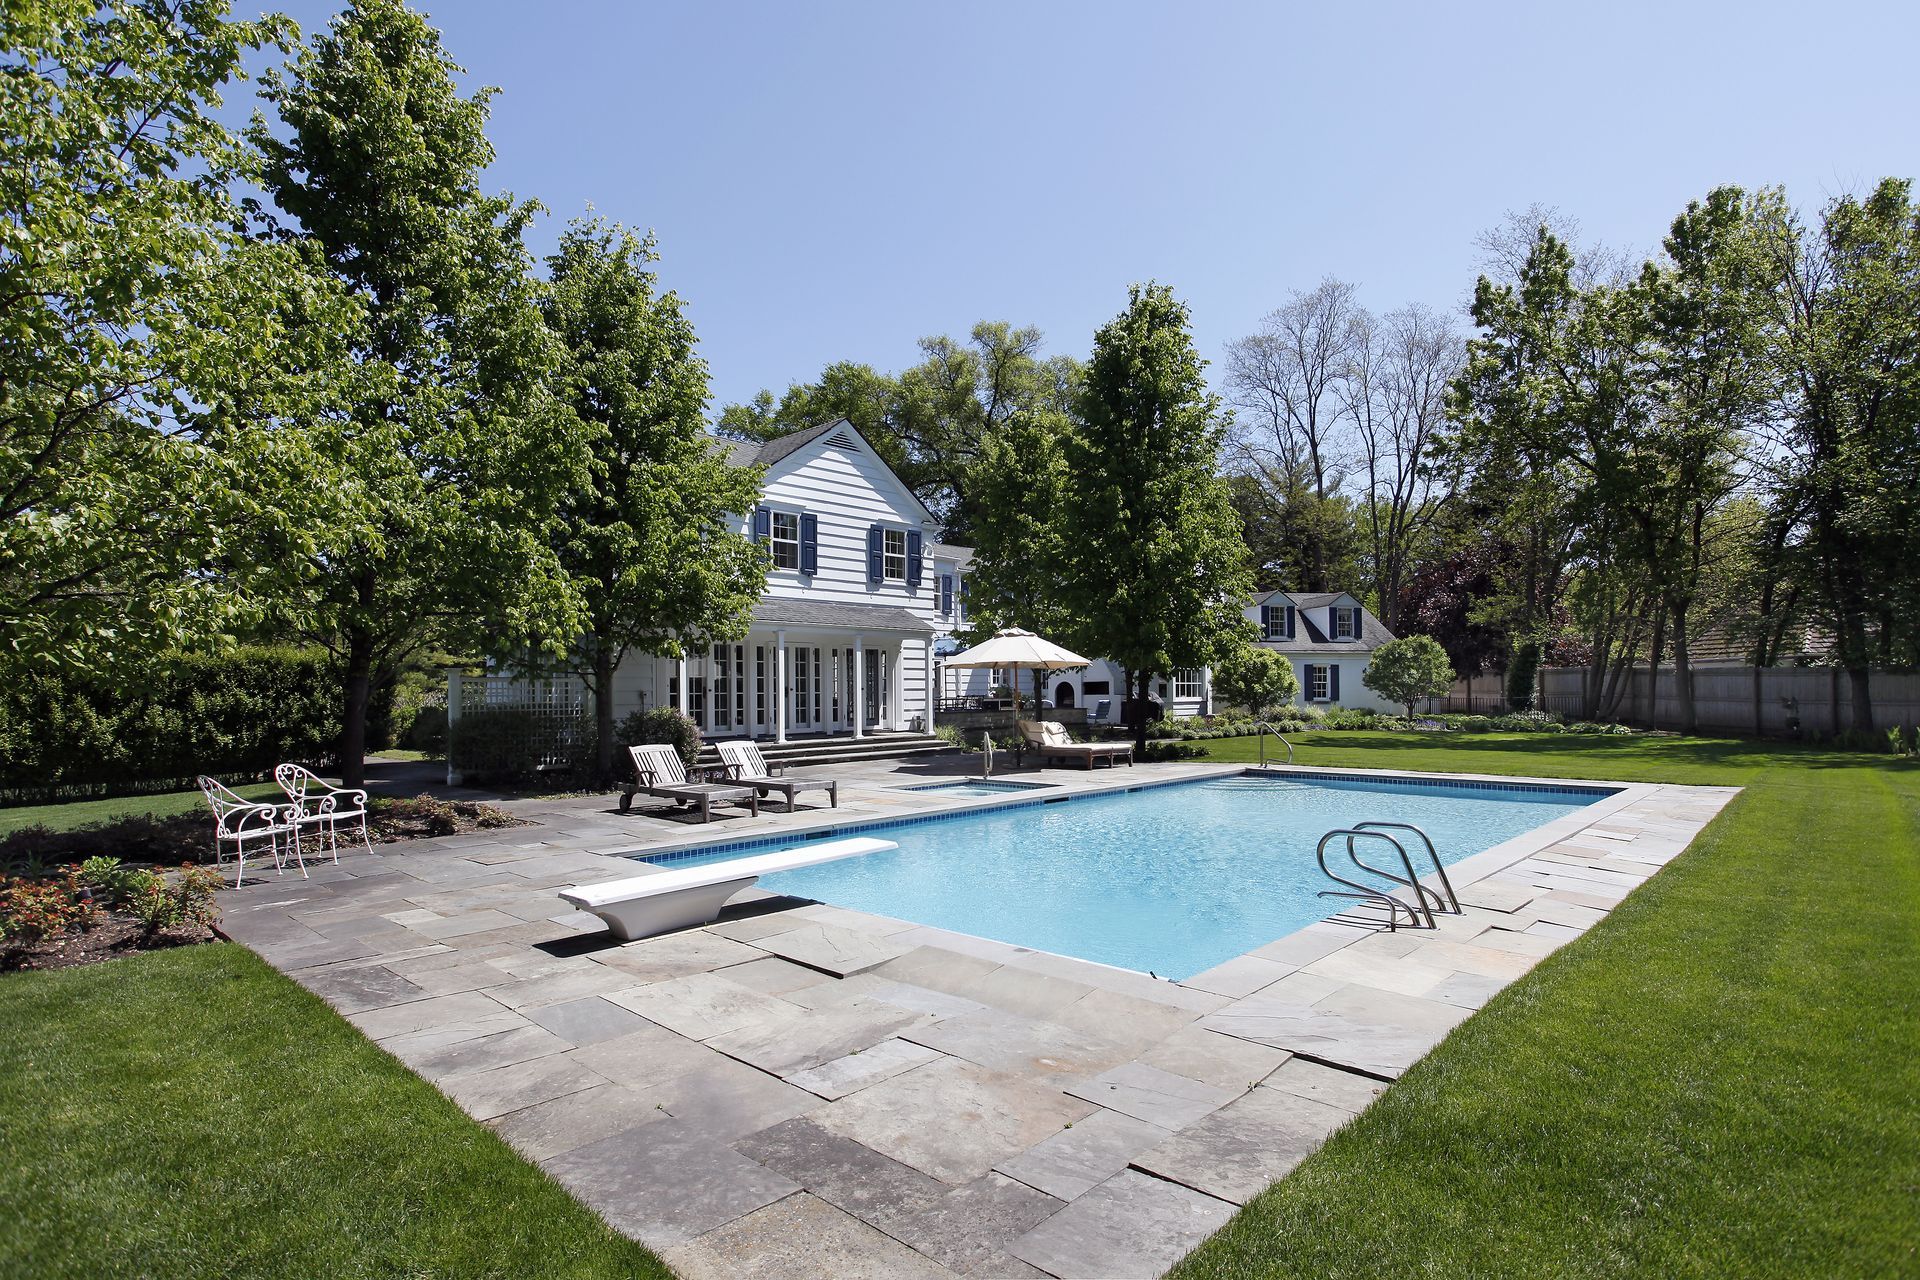 fiberglass pool in the backyard with a diving board